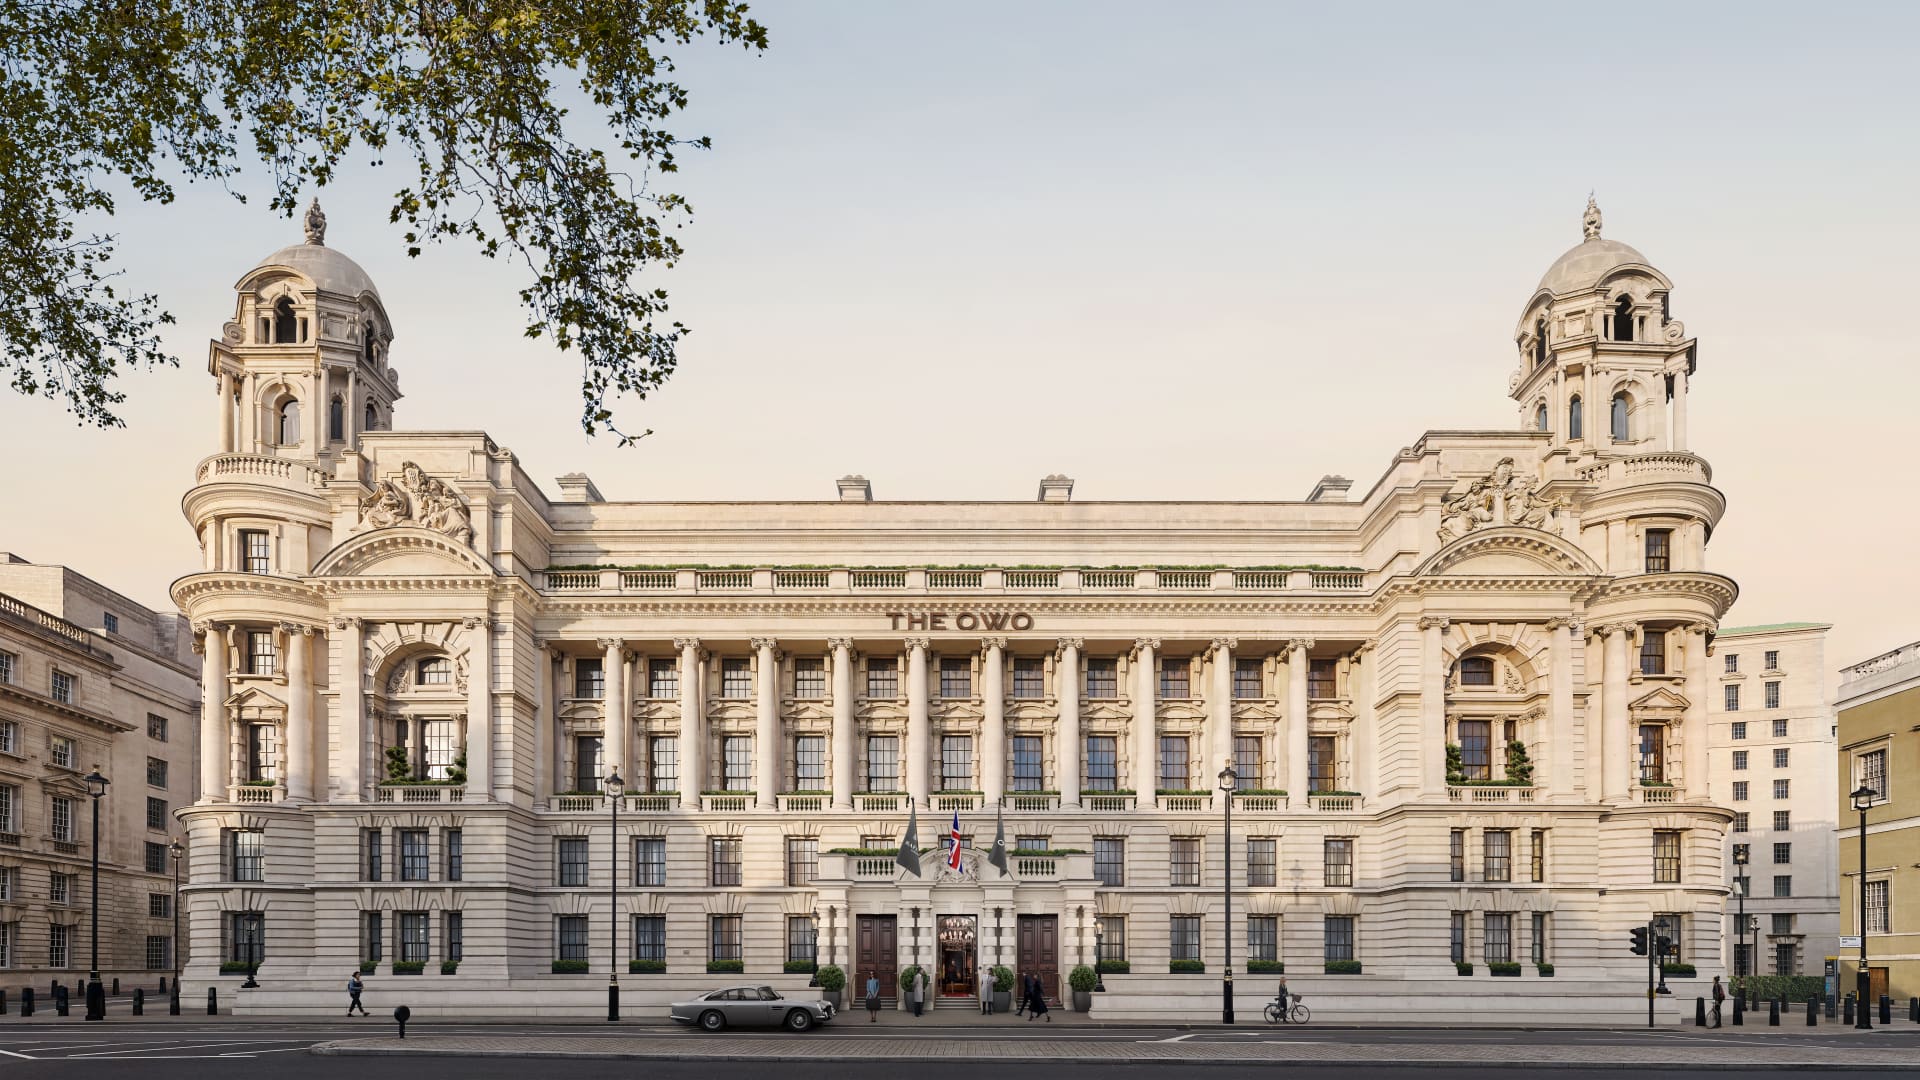 The Grade II listed Old War Office was built for the British Army in 1906 and is based on the site of the original Palace of Whitehall, home to several former British monarchs, including Henry VIII.